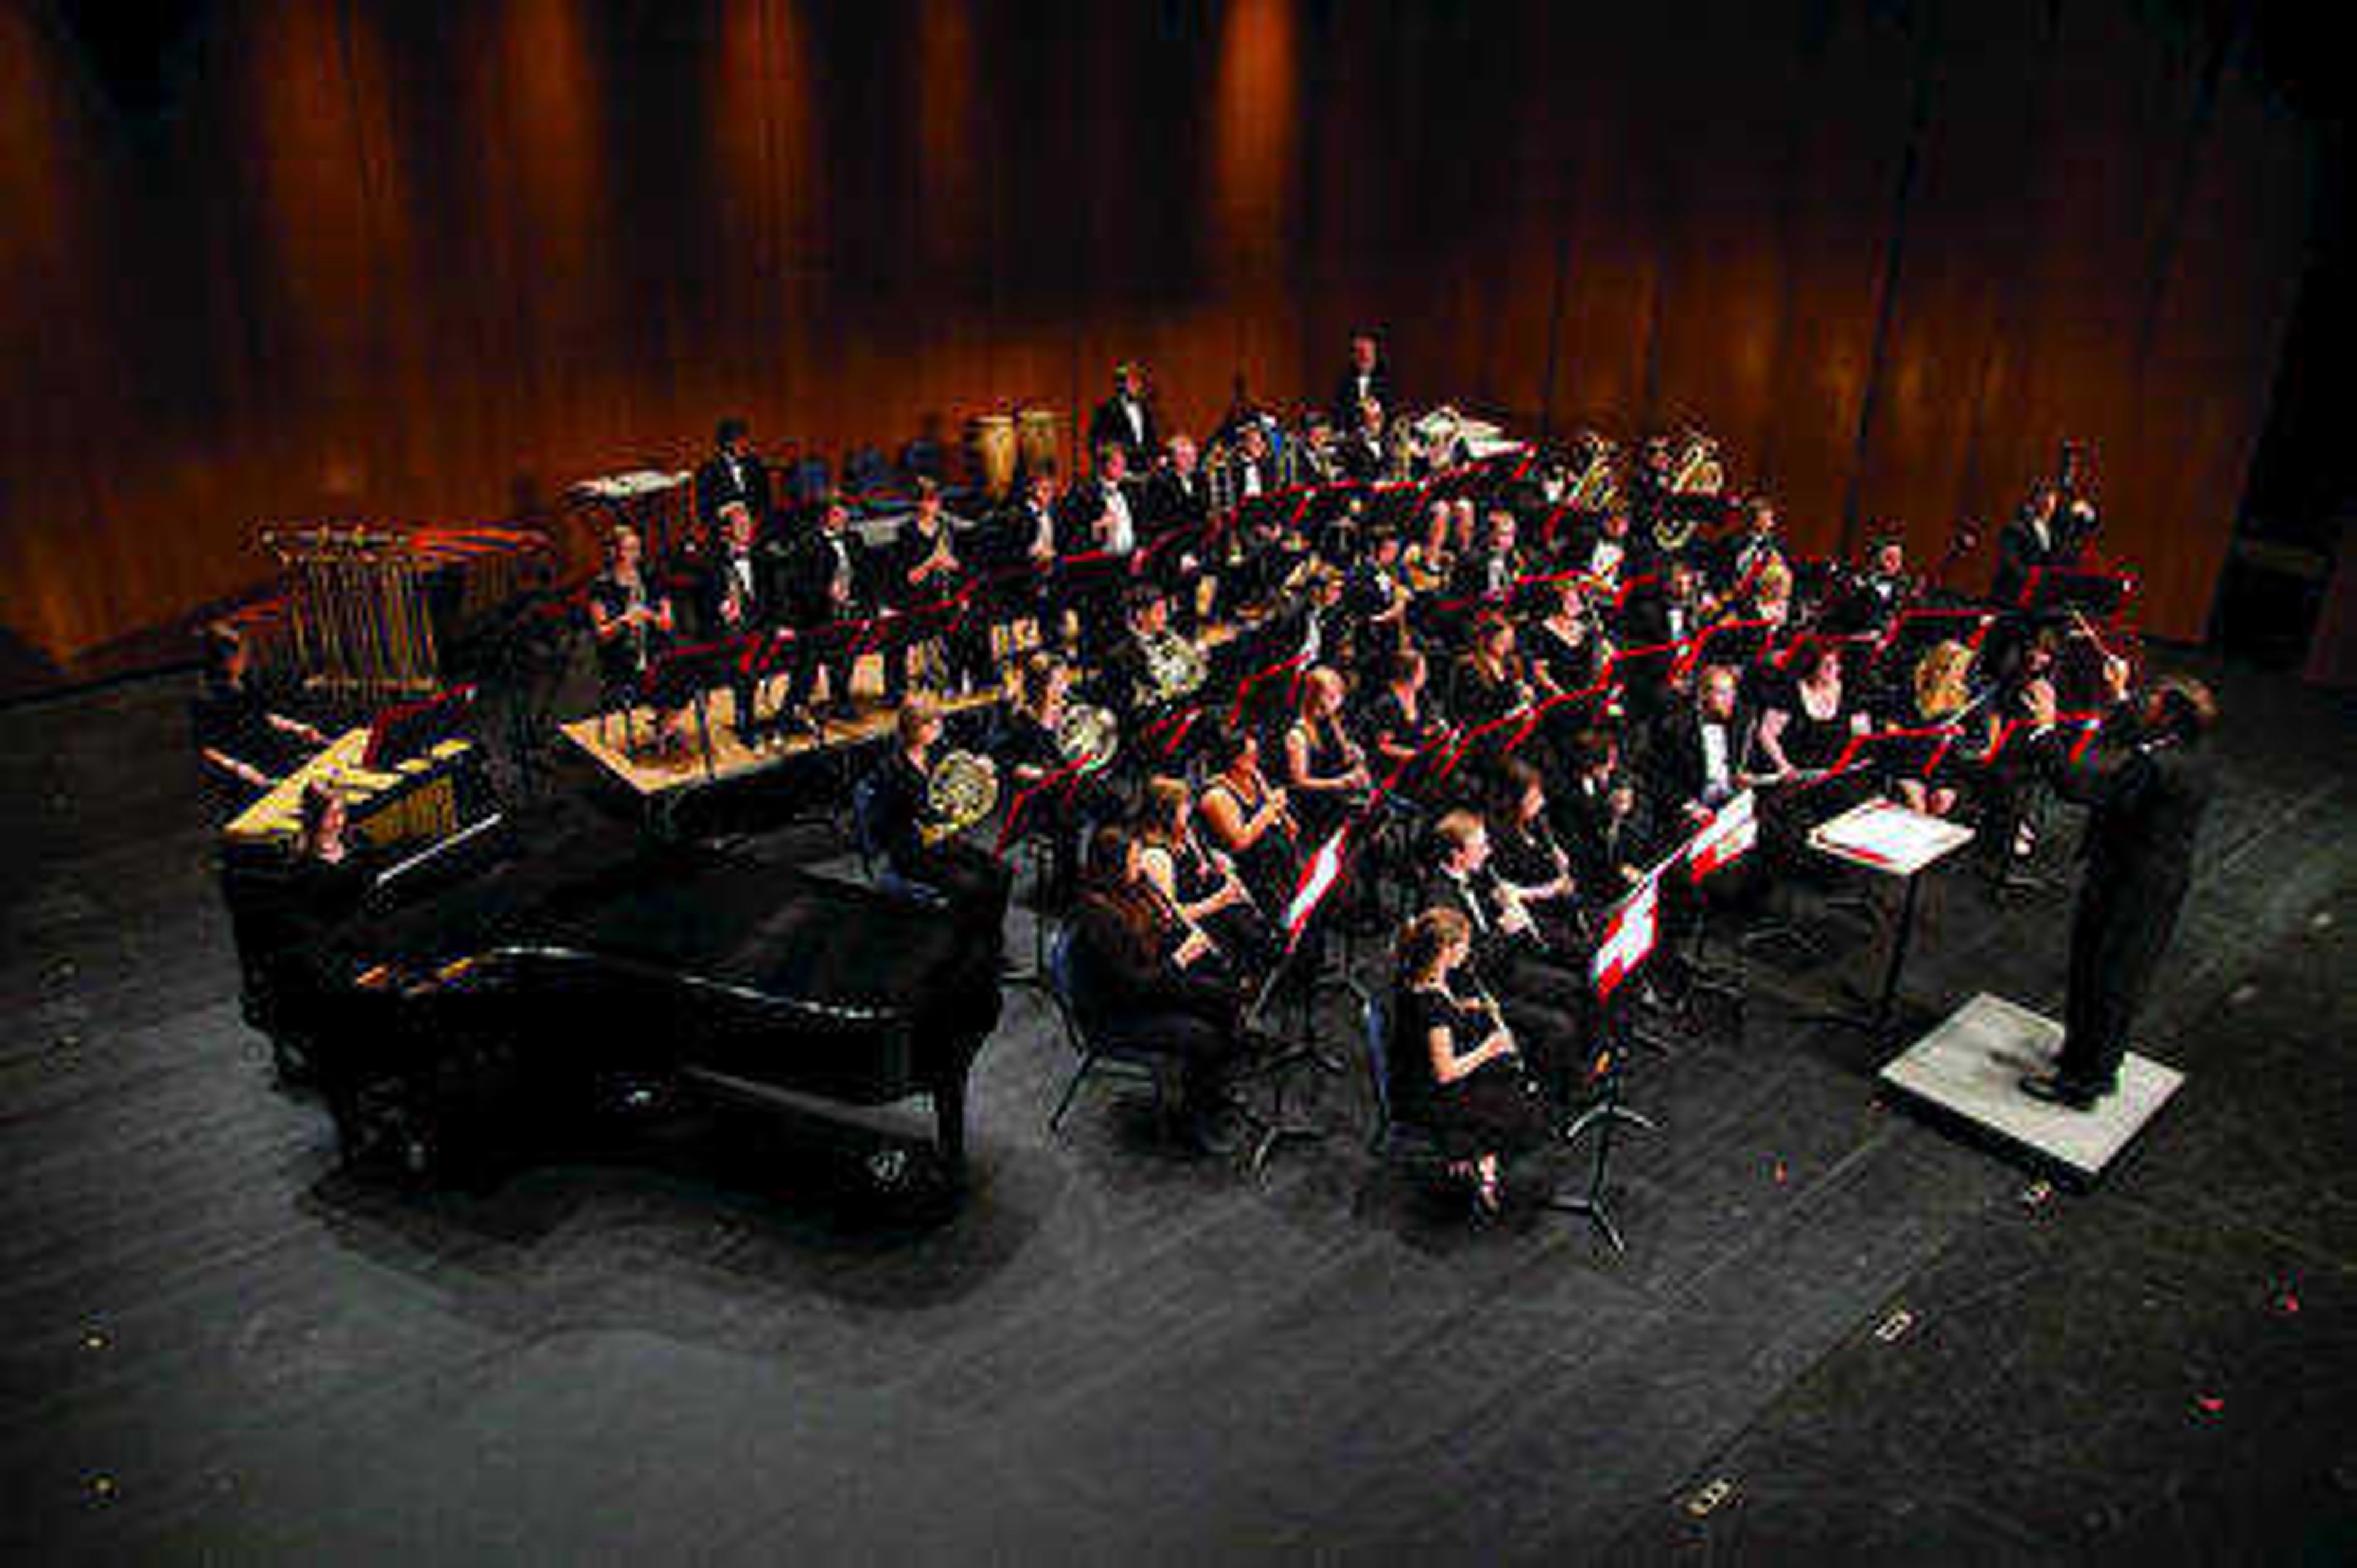 Southeast's wind symphony performance 'diverts' from holiday theme